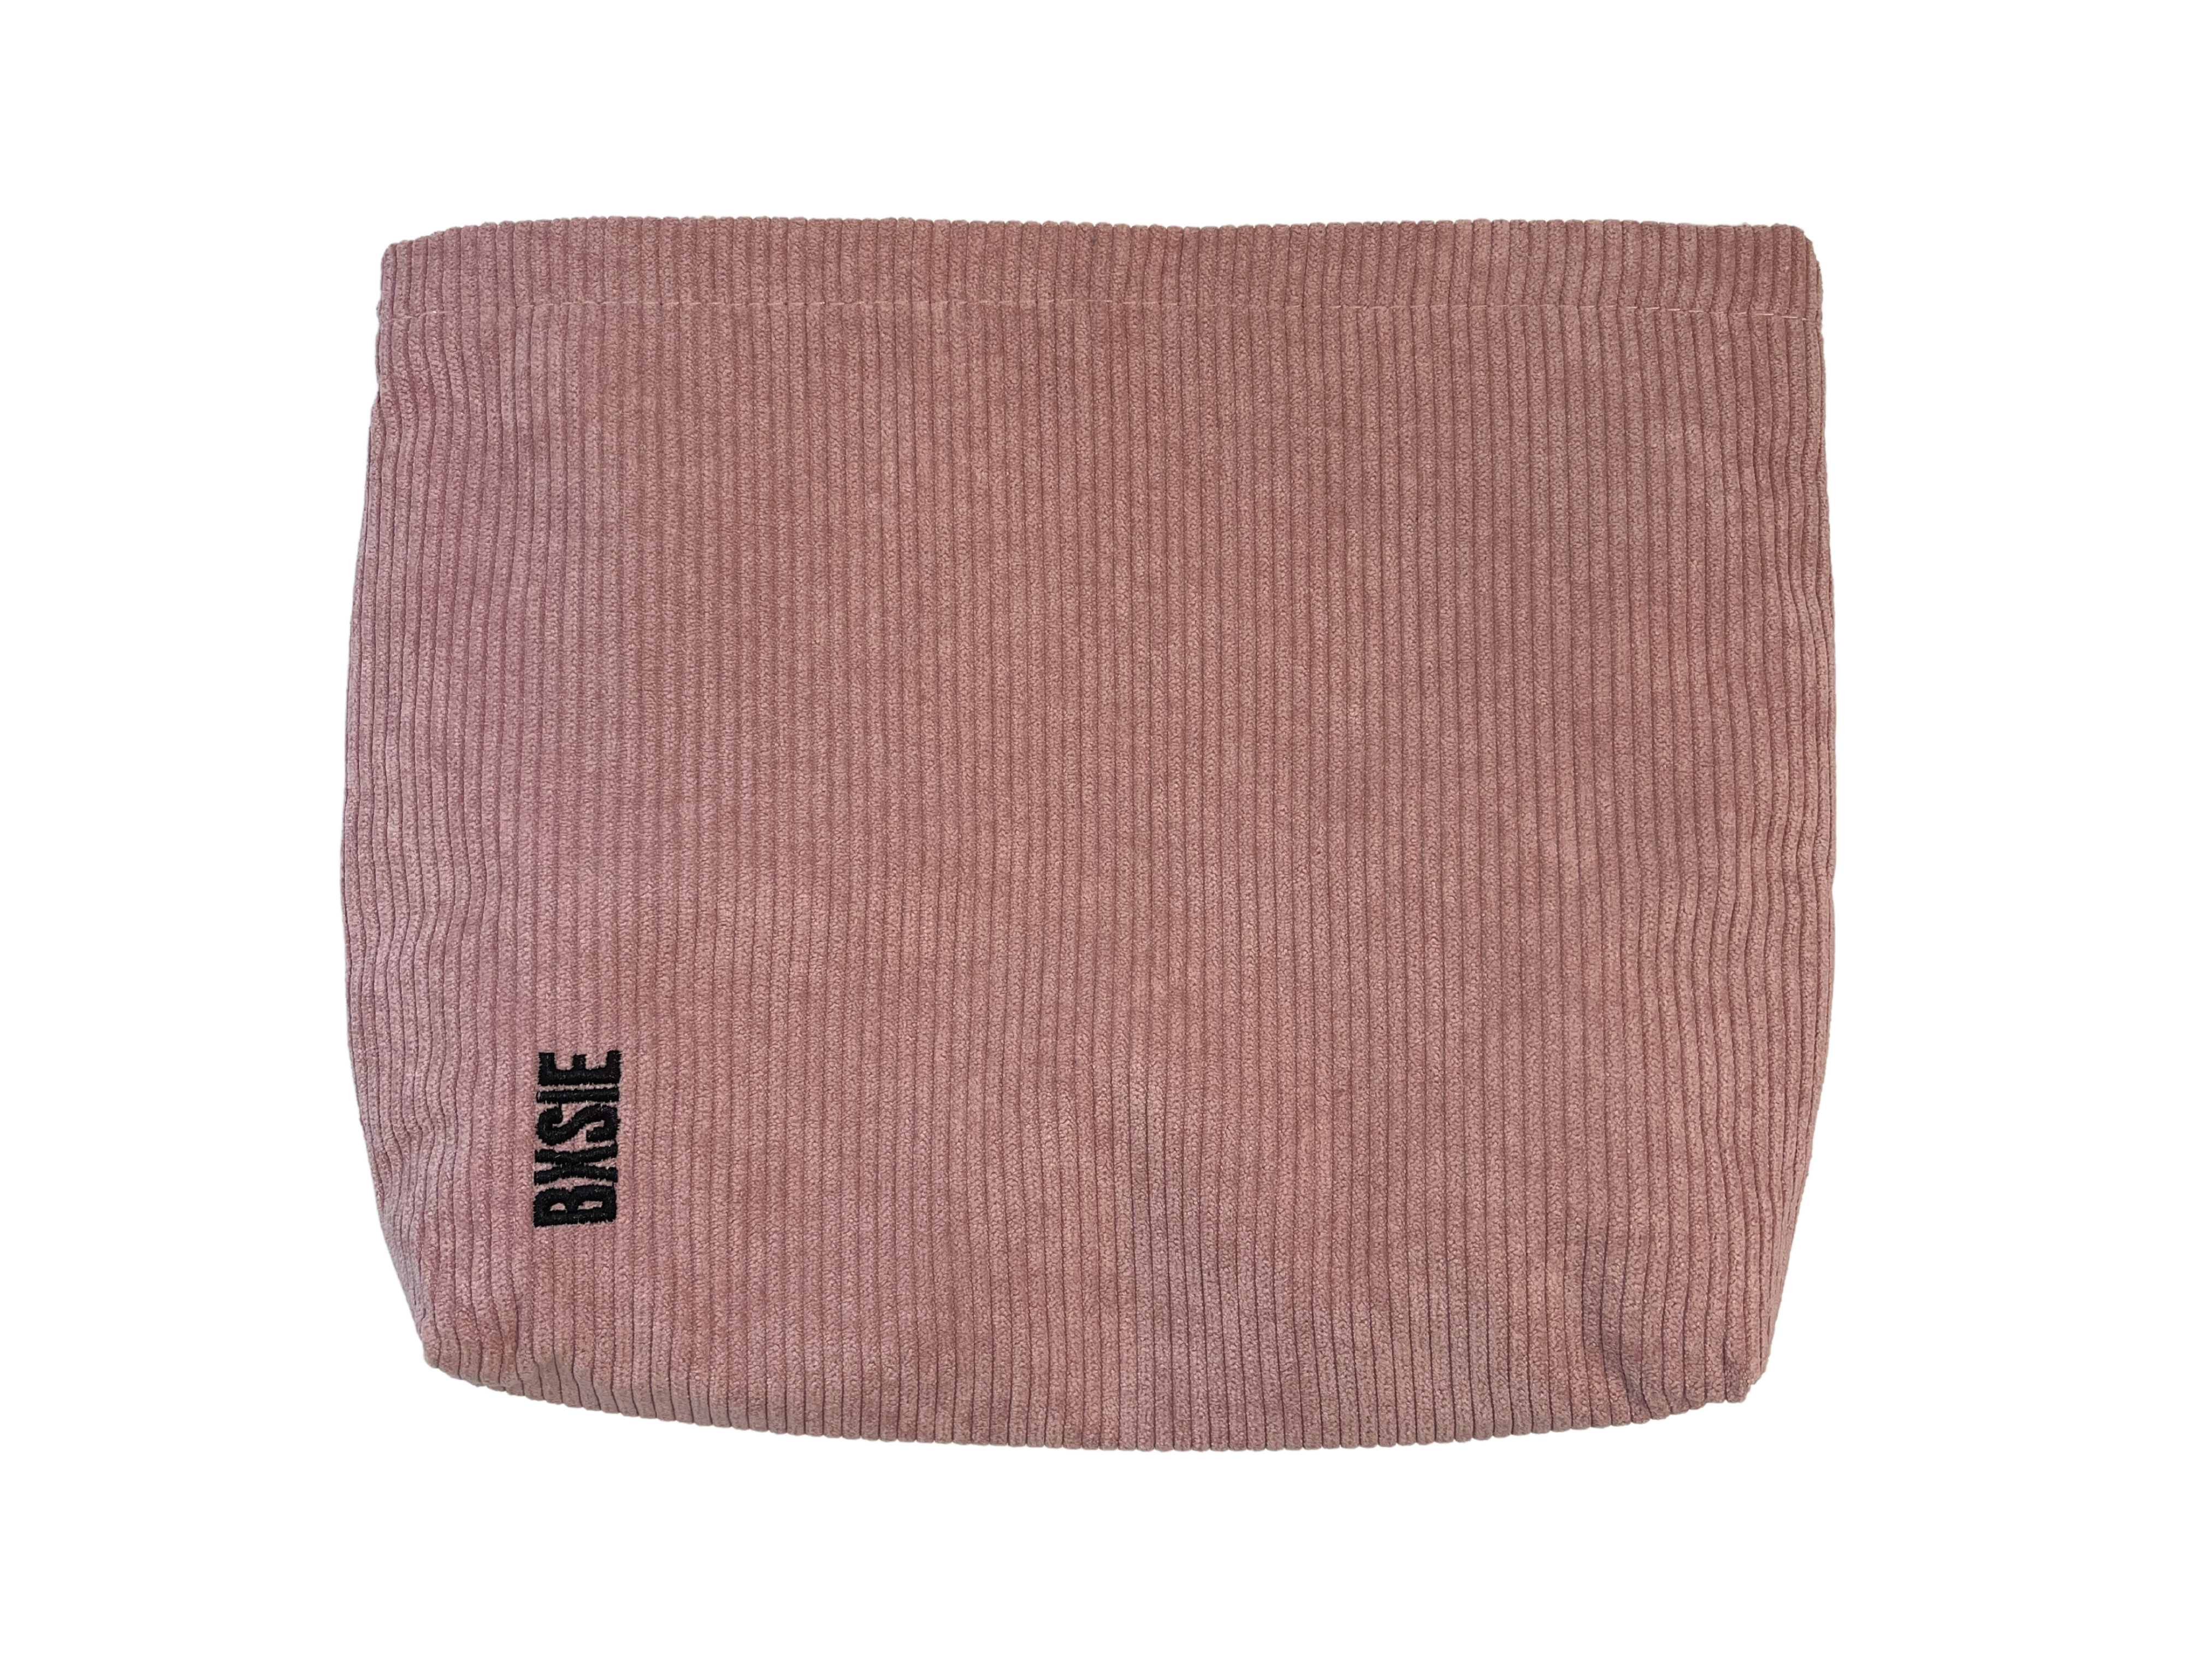 book sleeve, book pouch, front view, pink color, bxsie